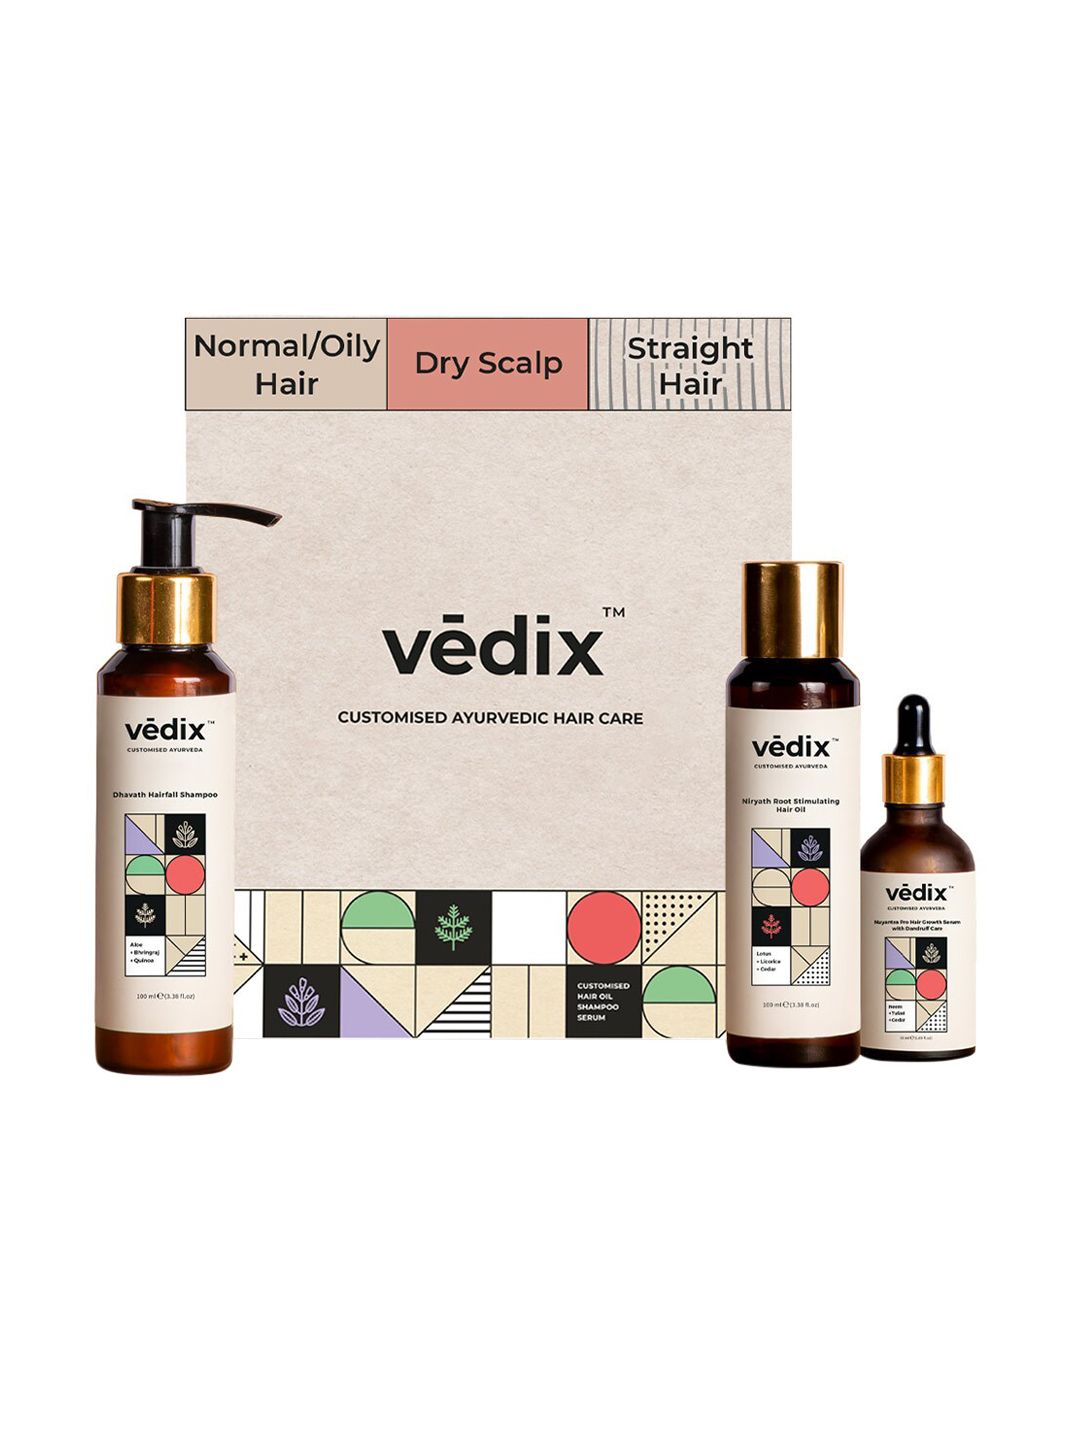 Vedix Hair Fall Control Regimen-Normal/Oily Hair with Dandruff-Dry Scalp Straight Hair Price in India